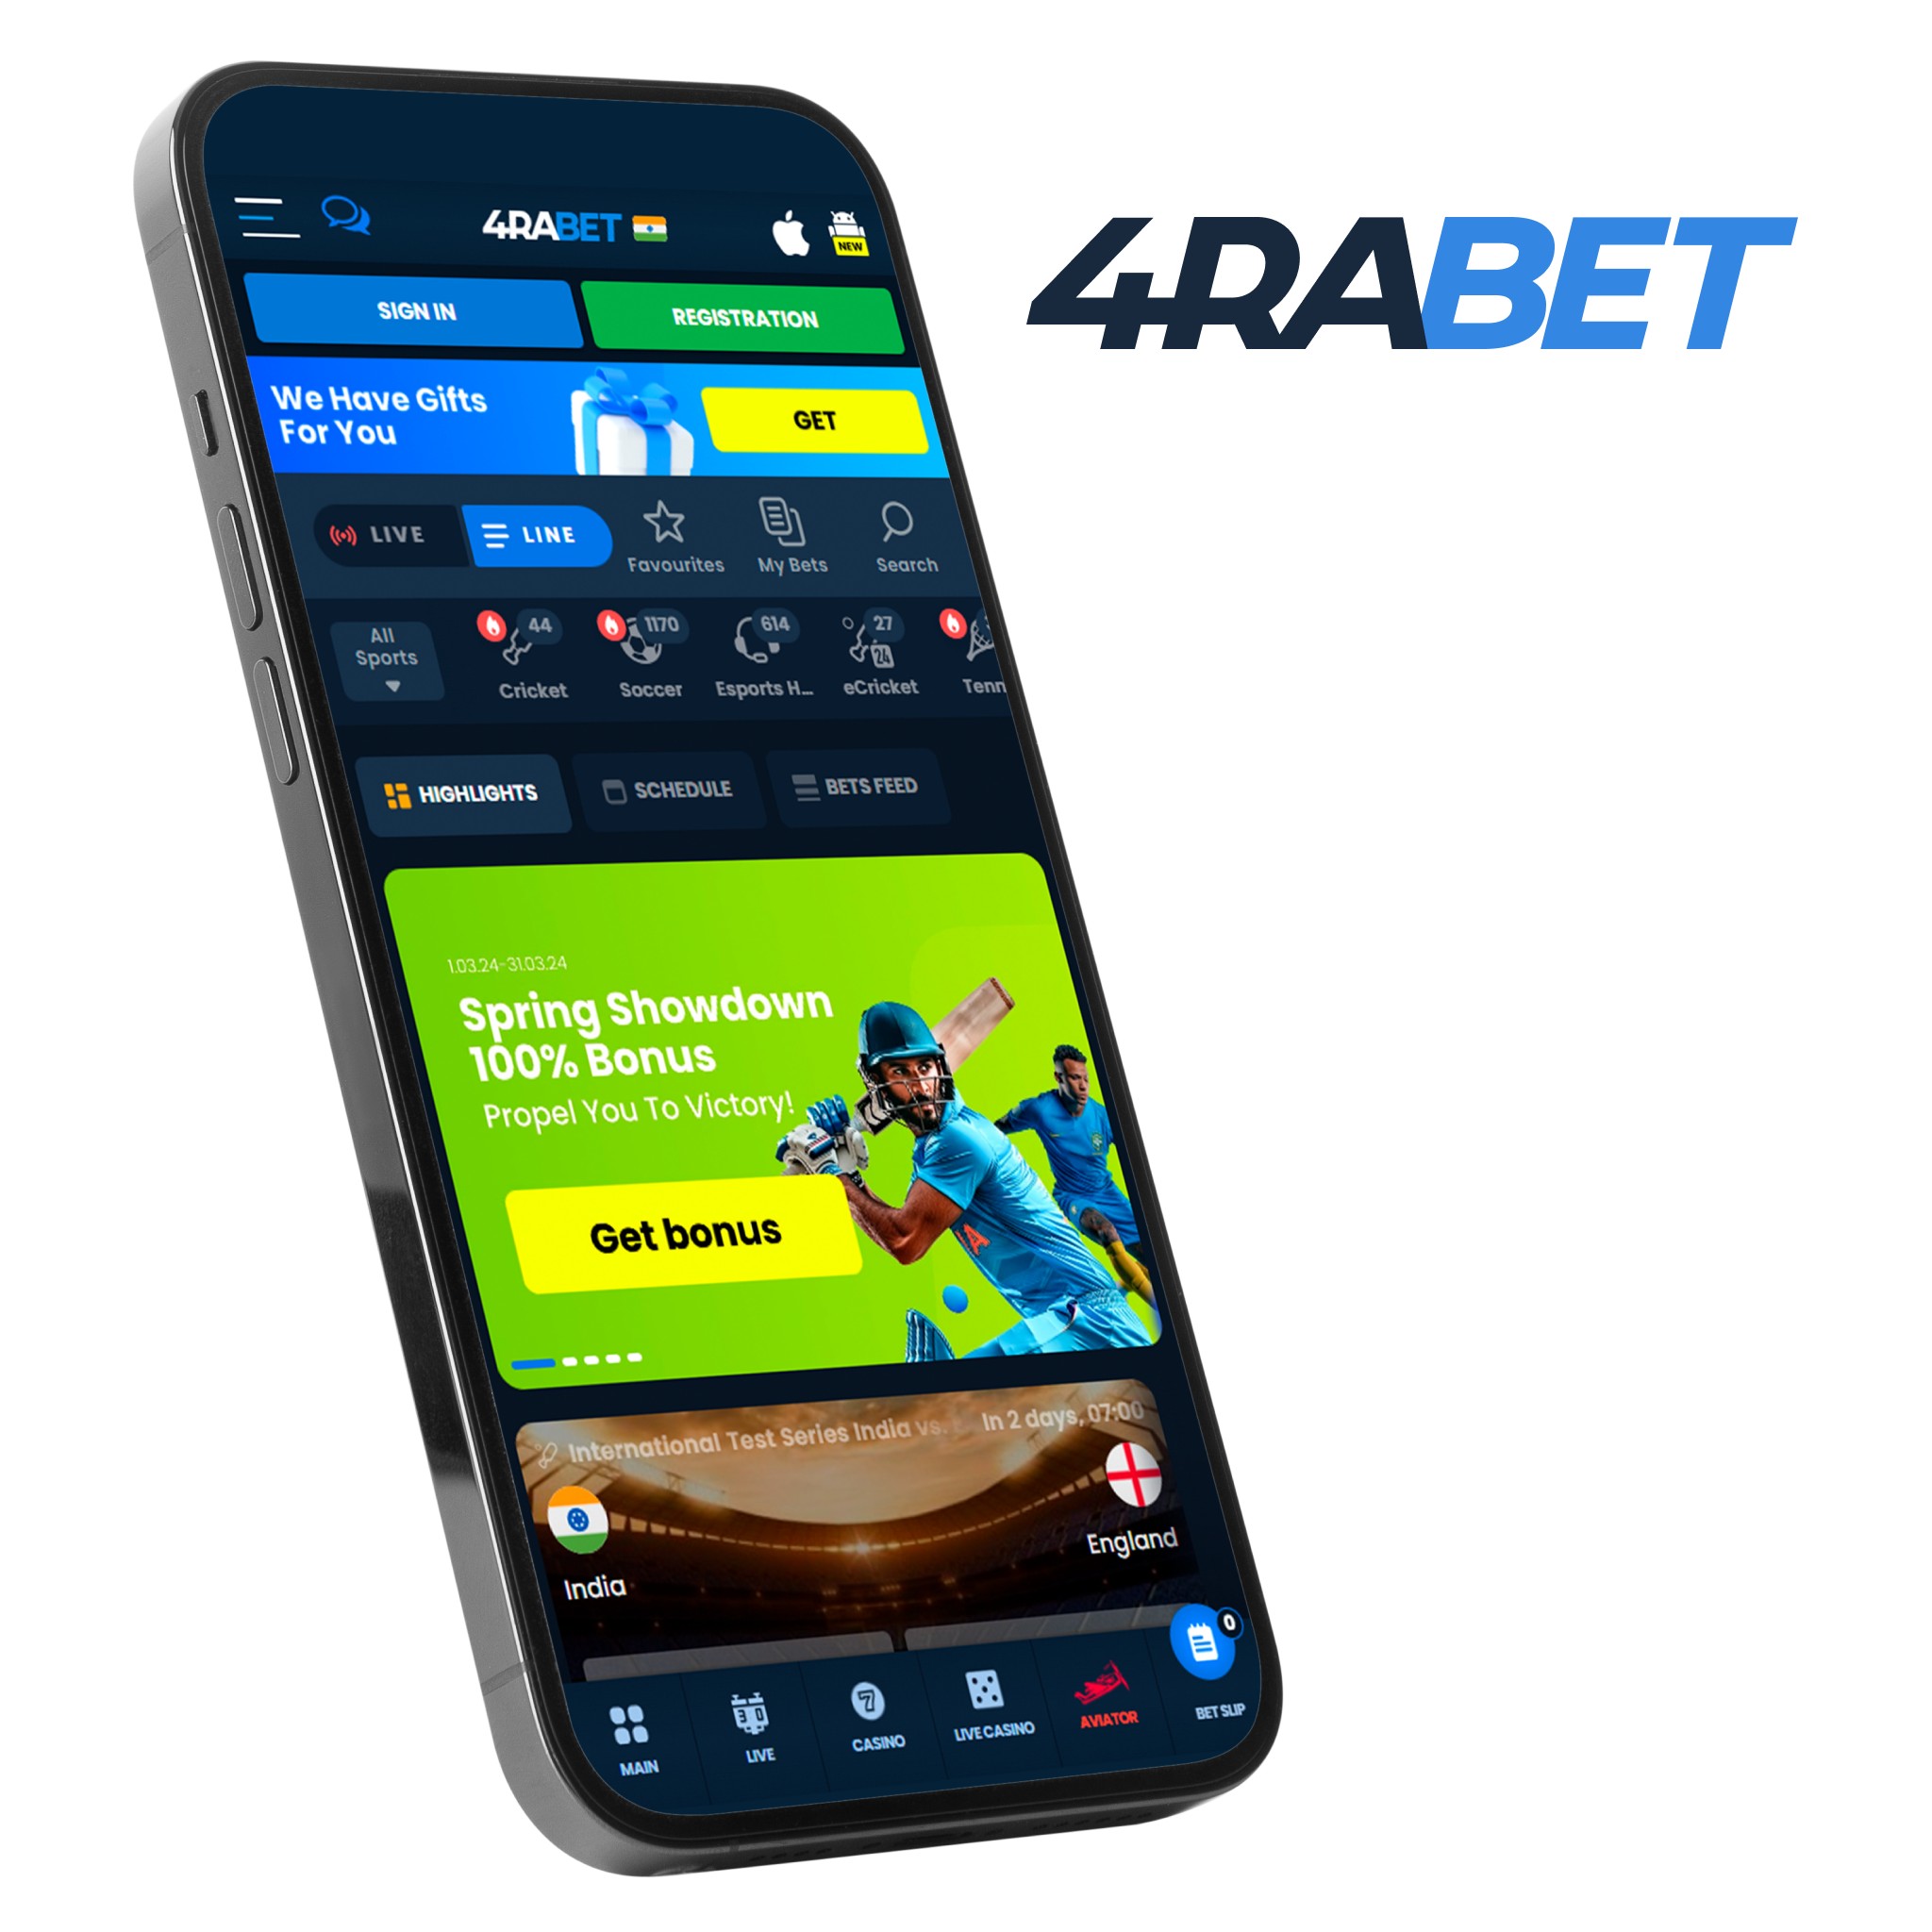 Taste the next level of online betting with 4rabet app - where every bet is a winning opportunity!